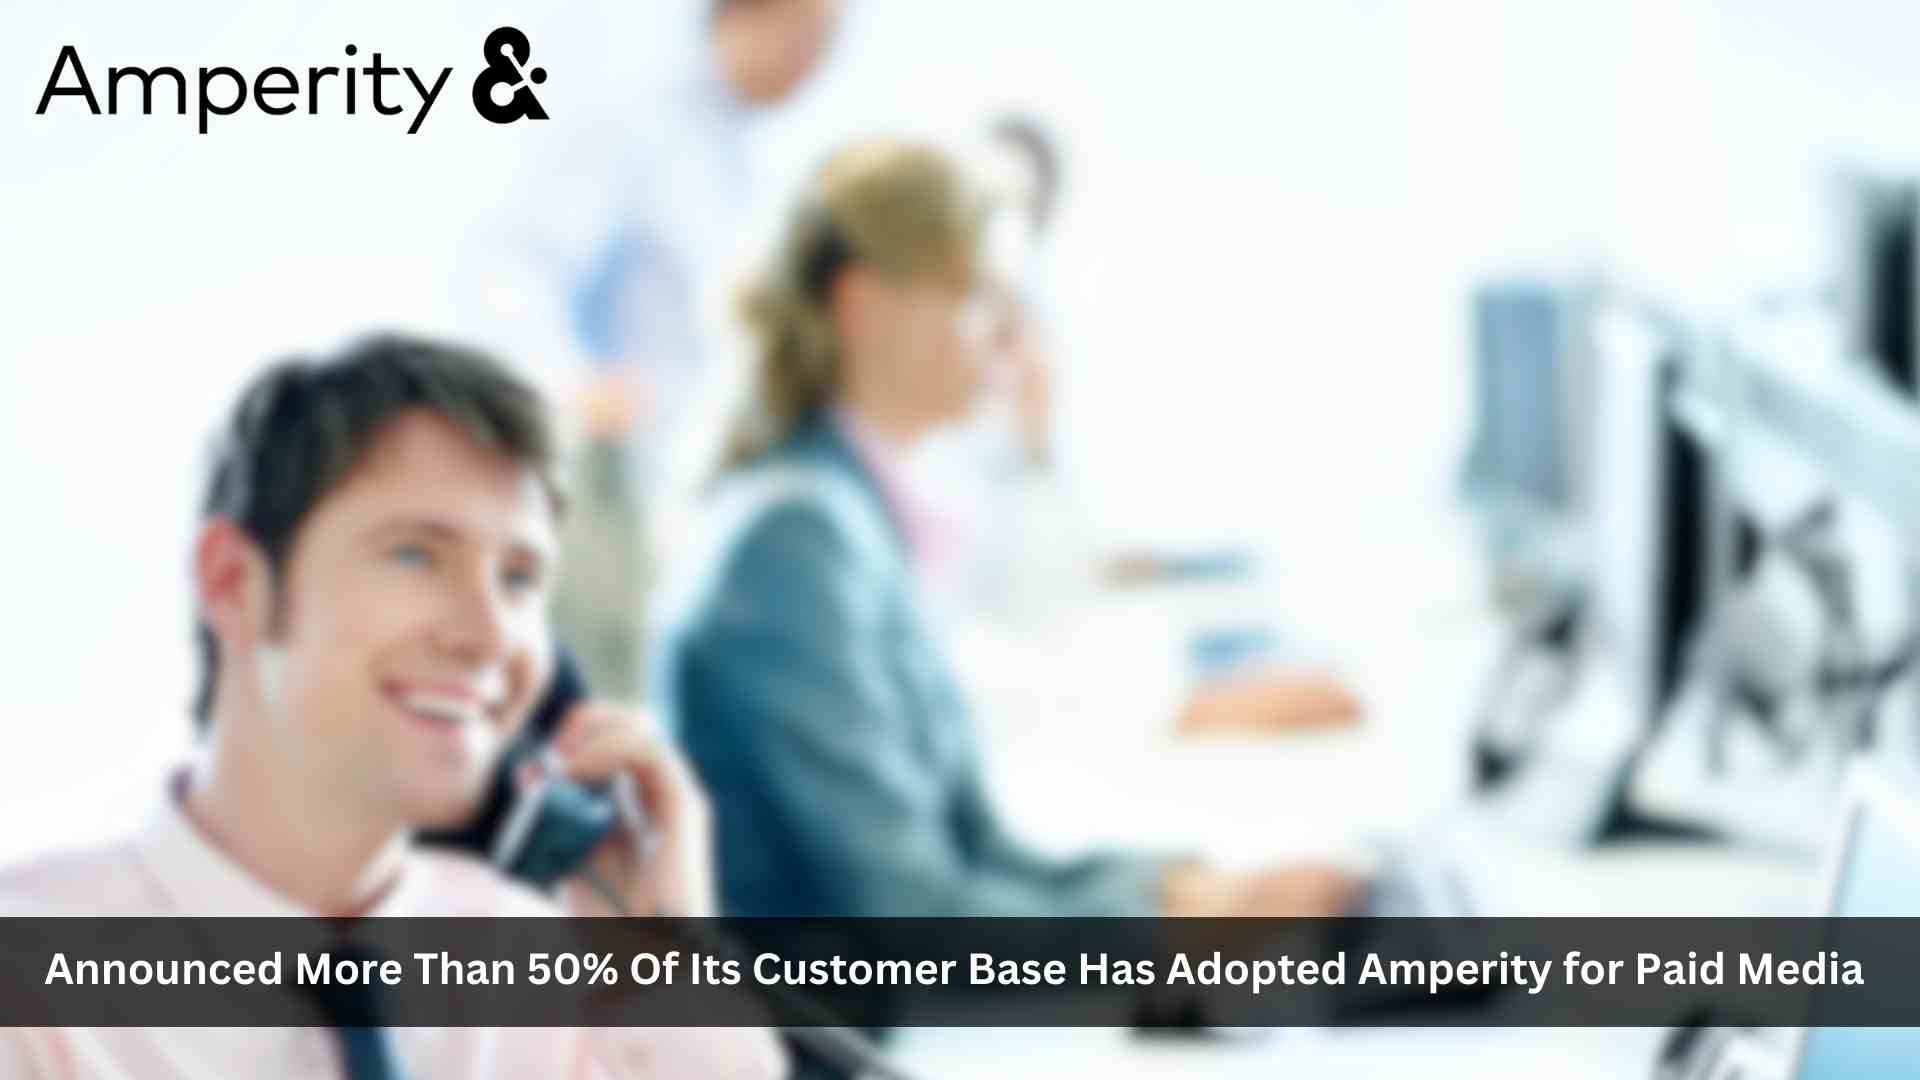 Customer Adoption of Amperity for Paid Media Soars to Over 50%, Delivering Over 11 Billion Profiles to Ad Ecosystem Daily